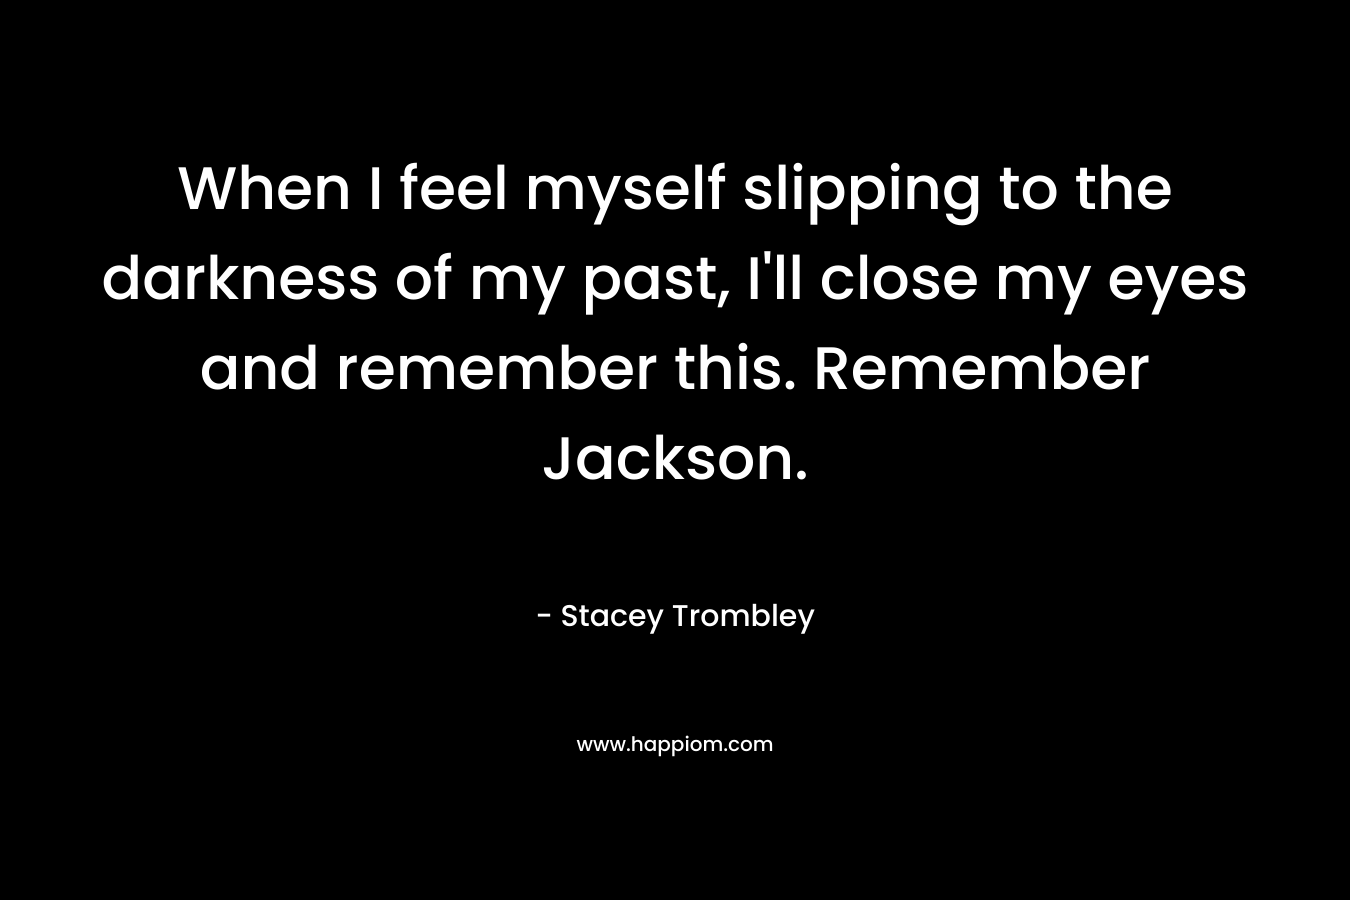 When I feel myself slipping to the darkness of my past, I'll close my eyes and remember this. Remember Jackson.